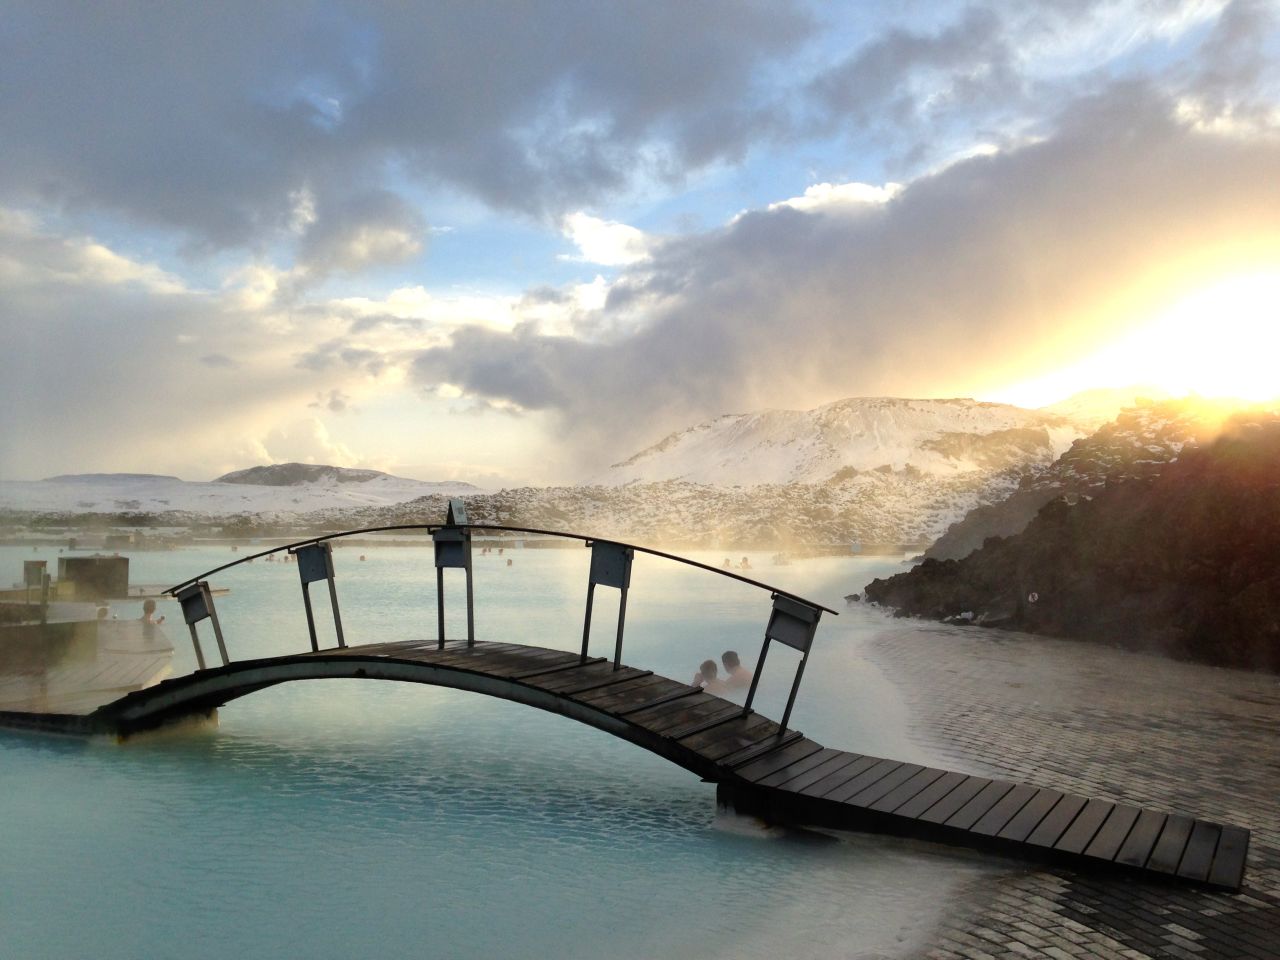 It looks like something from another world, but <a href="http://ireport.cnn.com/docs/DOC-1064842">Blue Lagoon</a> is a warm pool in Iceland that was accidentally formed by a geothermal power plant in 1976. People have been bathing in it ever since.